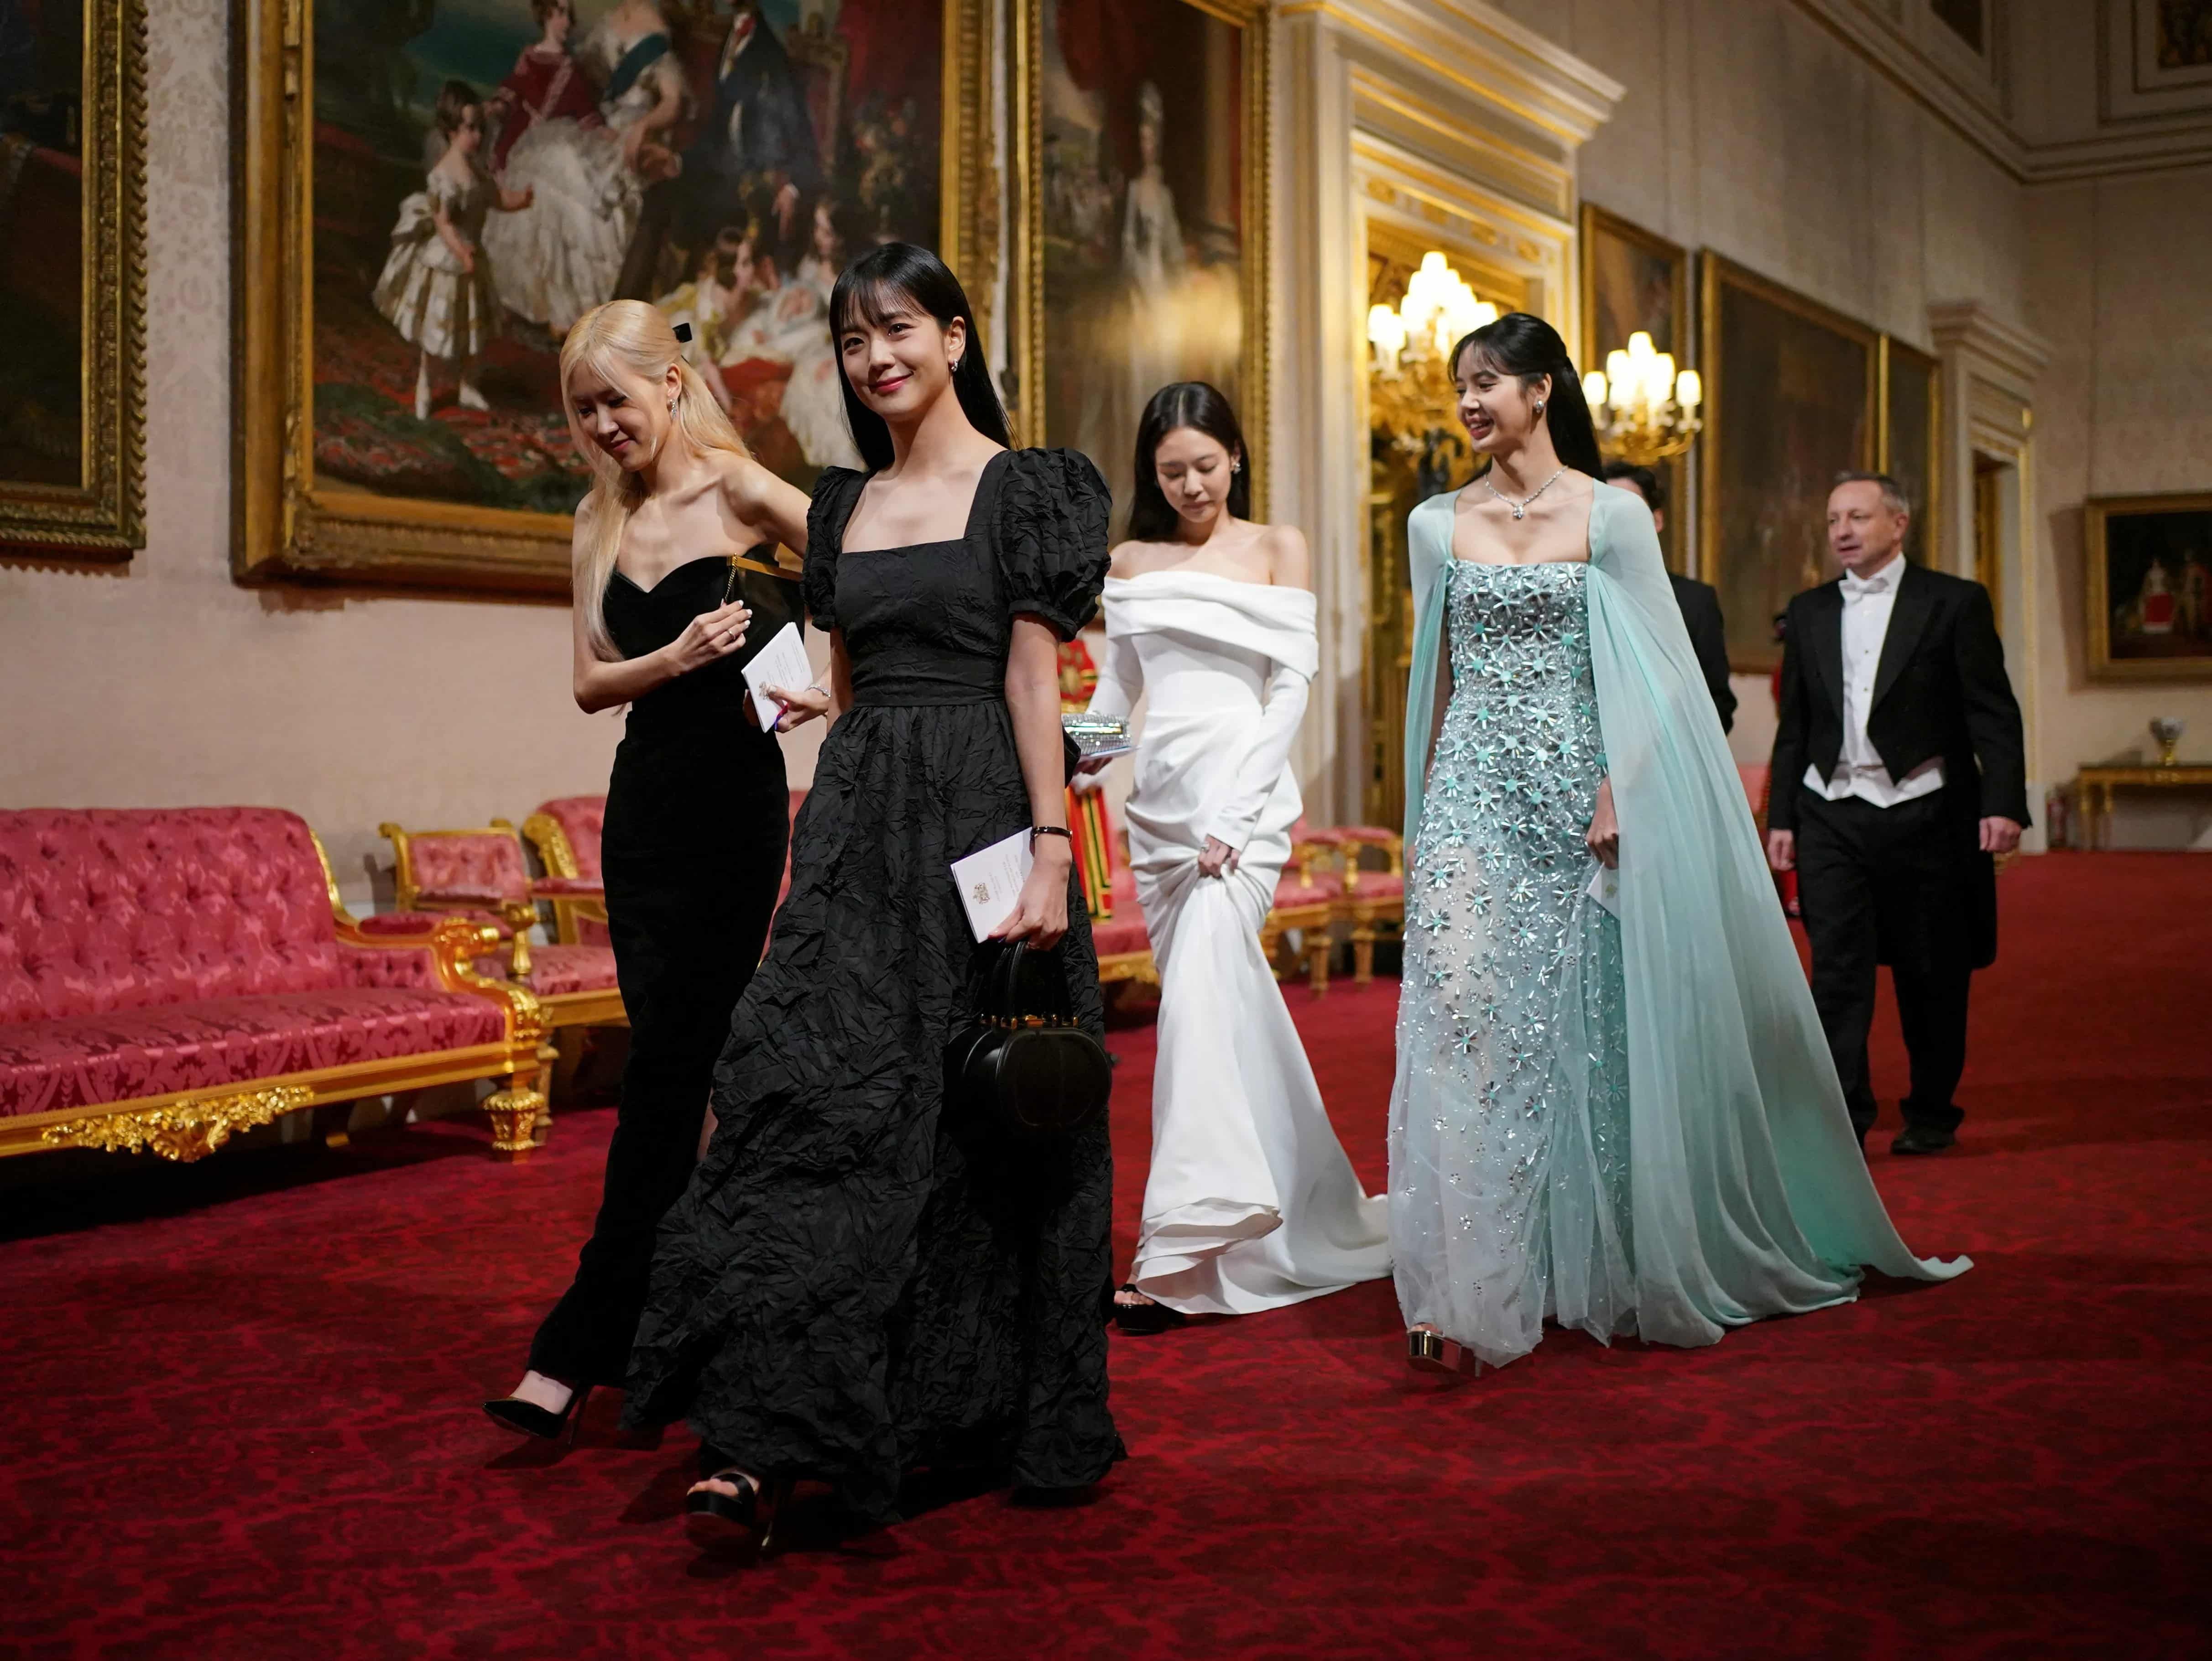 The members of Blackpink hit the palace in regal gowns as they attended a state banquet in honor of South Koreas president Tuesday night. via REUTERS